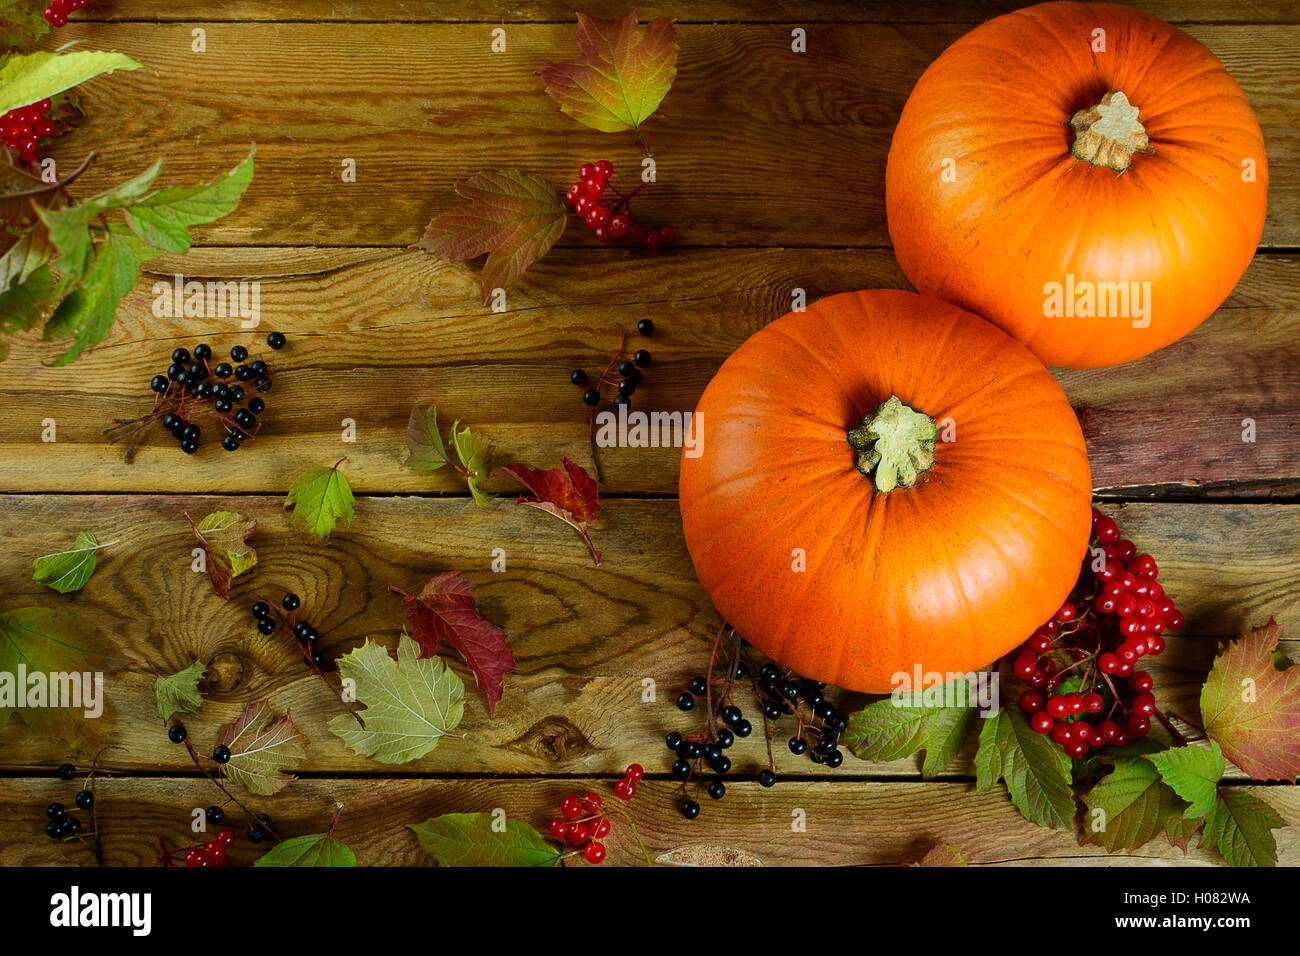 Thanksgiving concept  with pumpkins, berries and apples. Autumn background with seasonal vegetables and fruits. Stock Photo